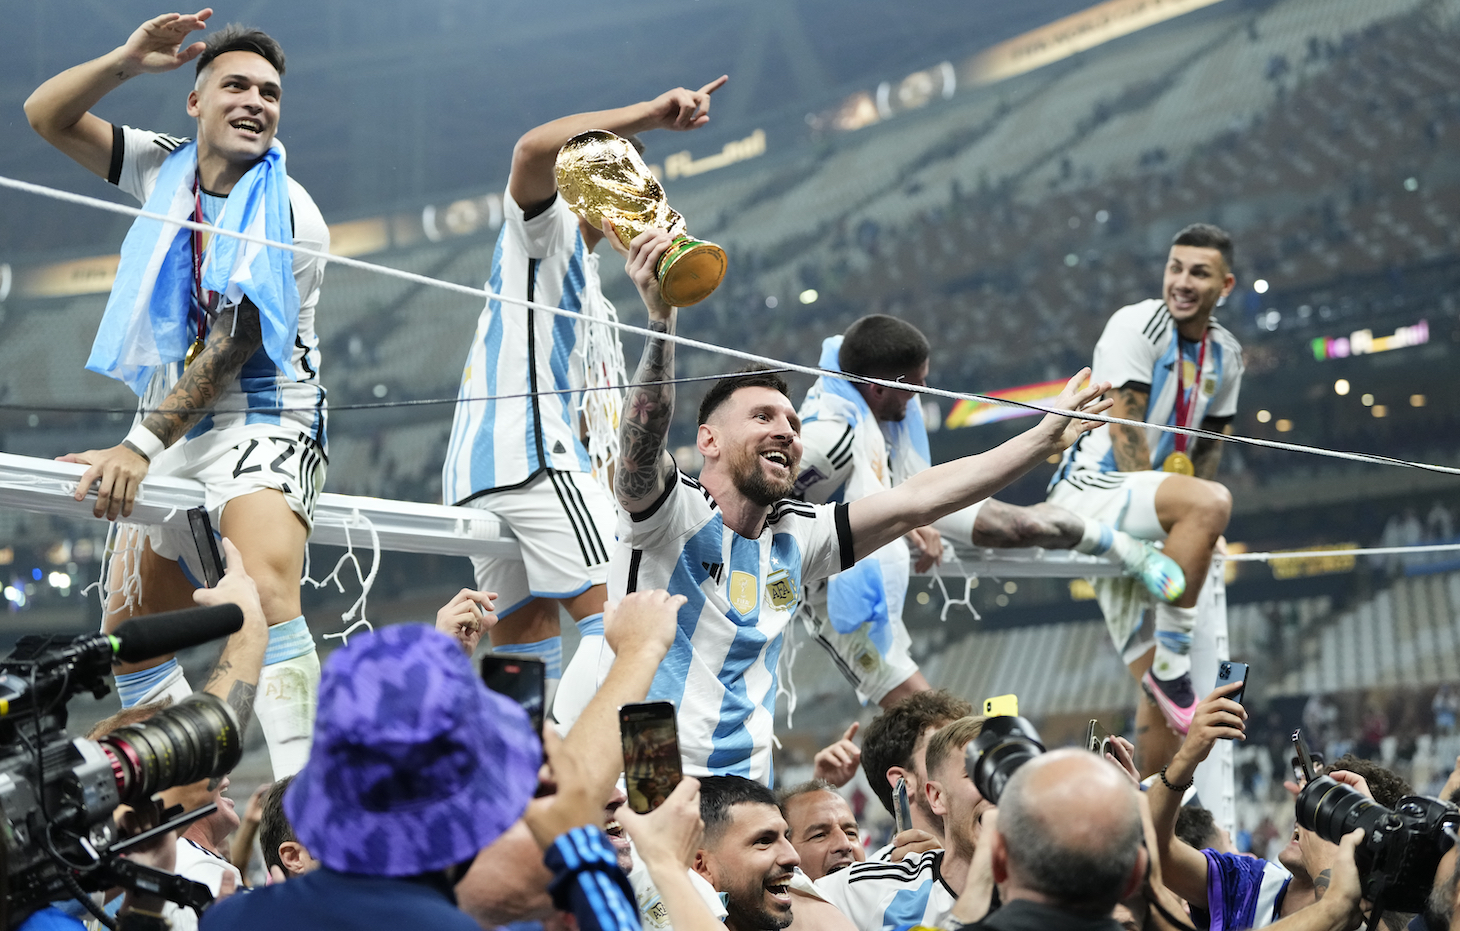 Lionel Messi right winger of Argentina and Paris Saint-Germain with the World Cup trophy after the FIFA World Cup Qatar 2022 Final match between Argentina and France at Lusail Stadium on December 18, 2022 in Lusail City, Qatar.